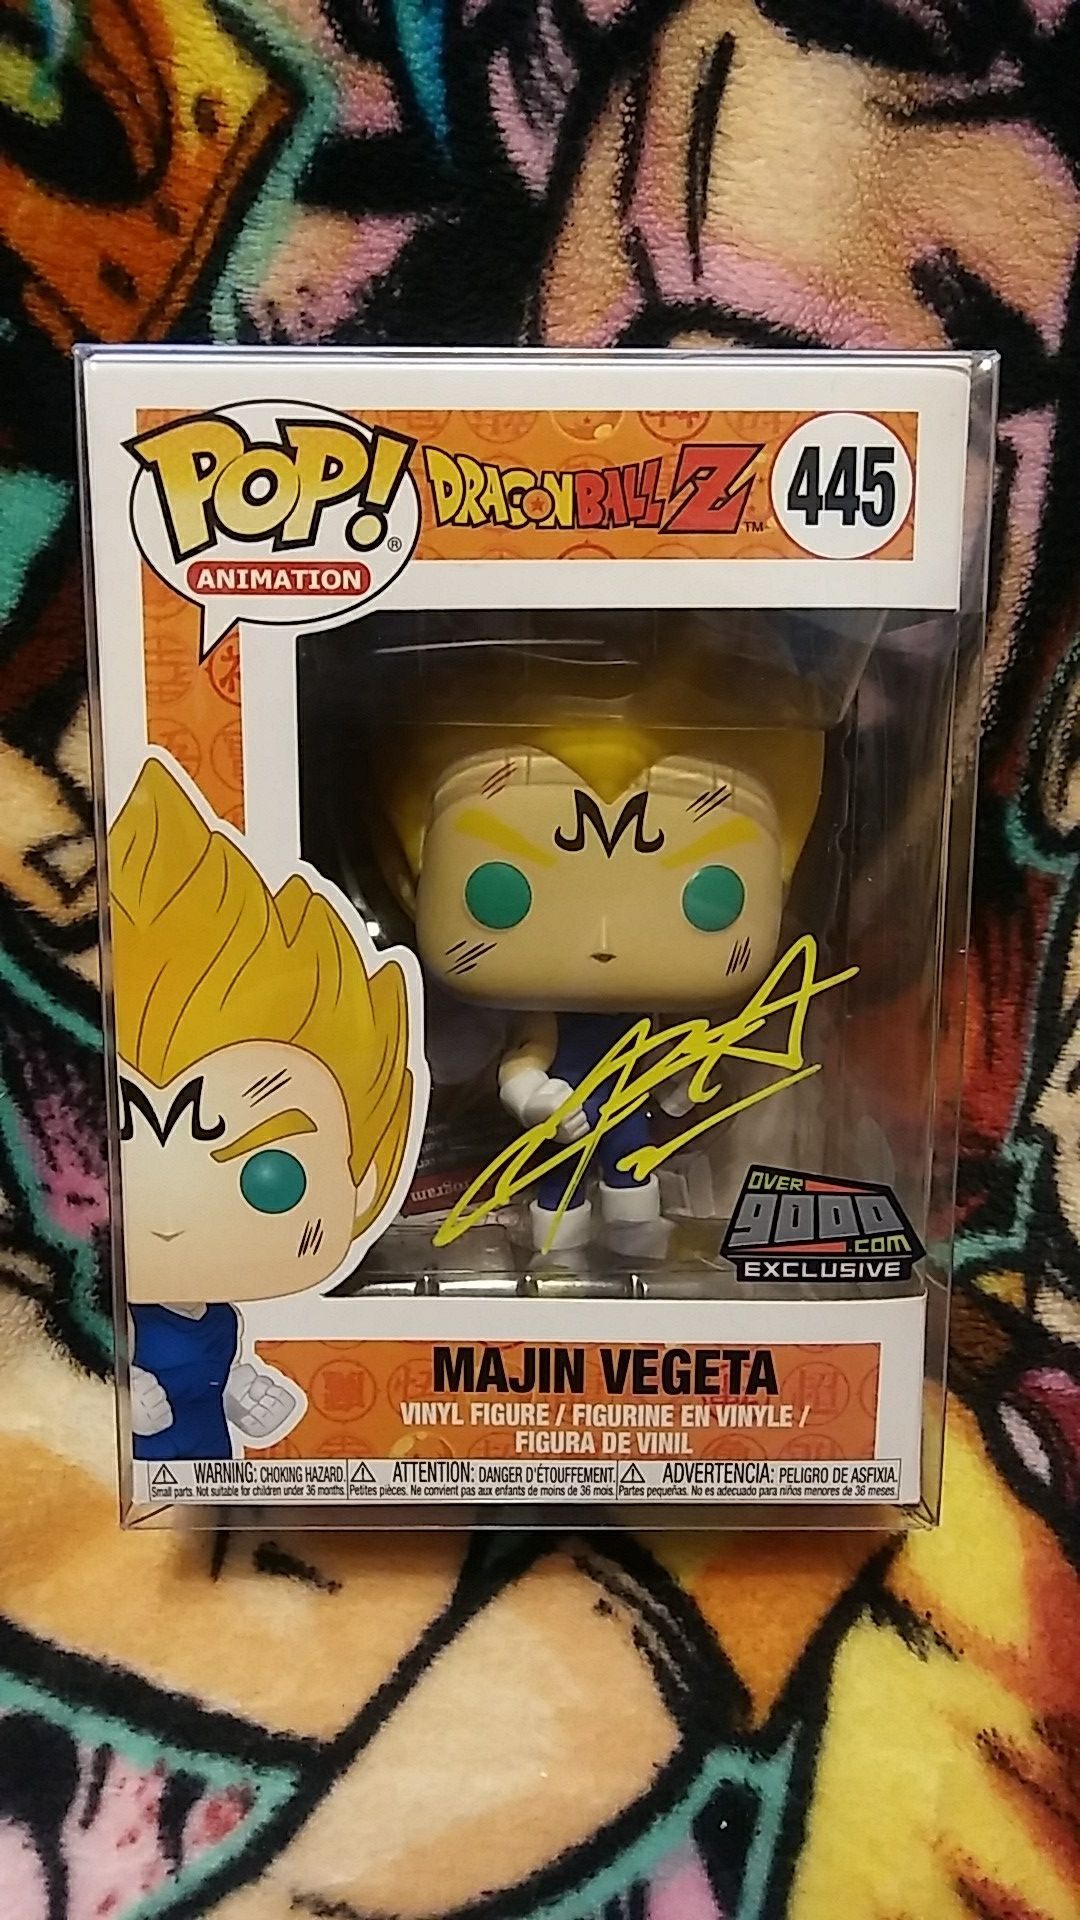 Funko Pop Dragon Ball Z Majin Vegeta Over 9000 Exclusive #445 Signed / Autographed by Voice Actor Chris Sabat with JSA Certification!